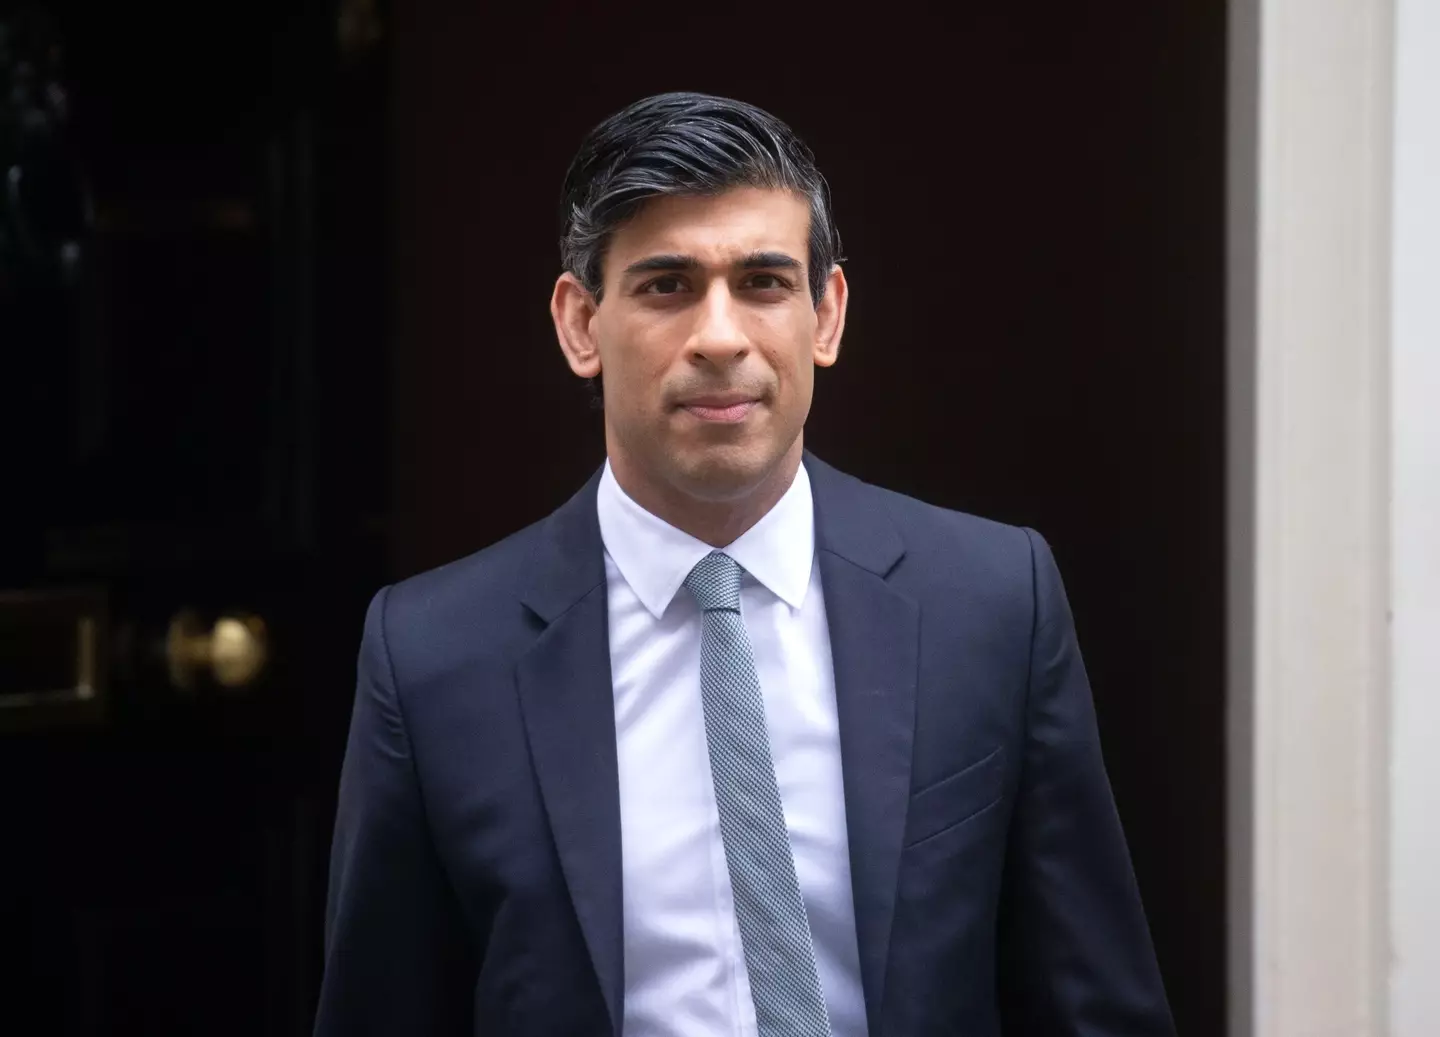 Rishi Sunak faces increased pressure to implement measures to protect the hardest-hit families (